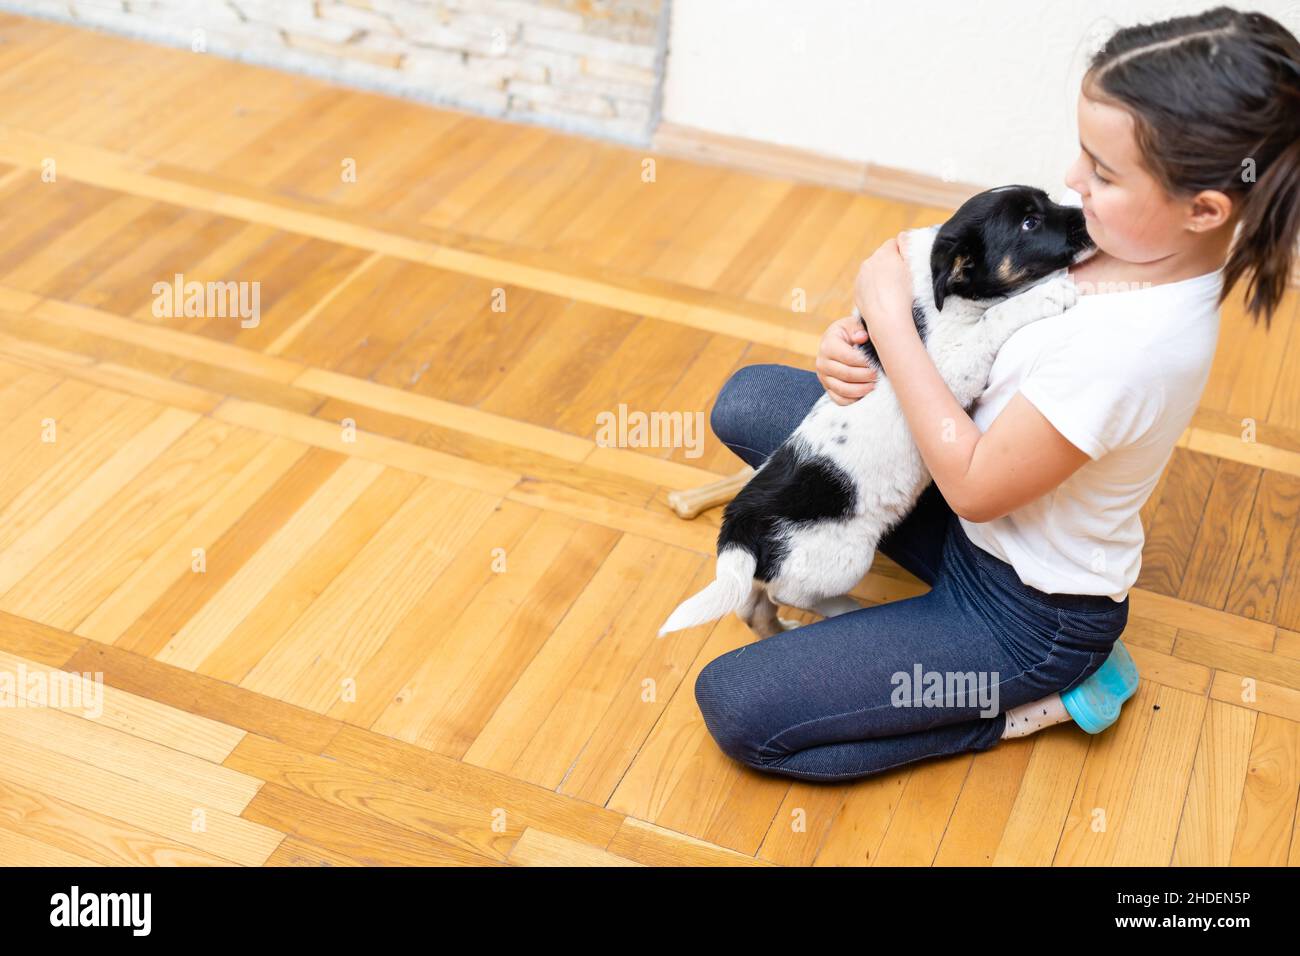 Portrait of a beautiful smiling young girl being licked on the cheek by a cute puppy dog Stock Photo